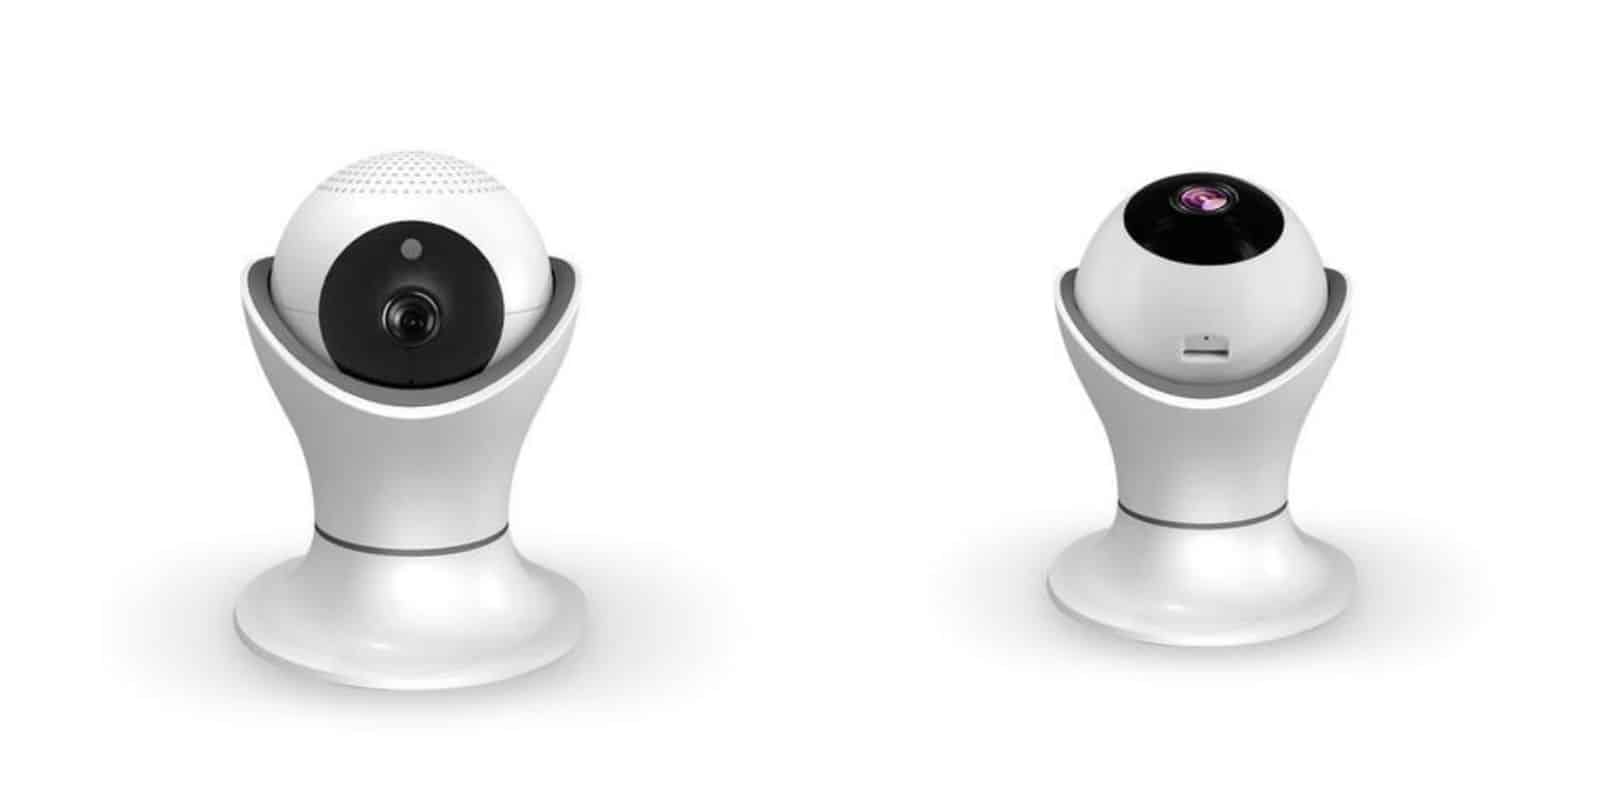 Watch your home from your mobile device with this encrypted security camera.